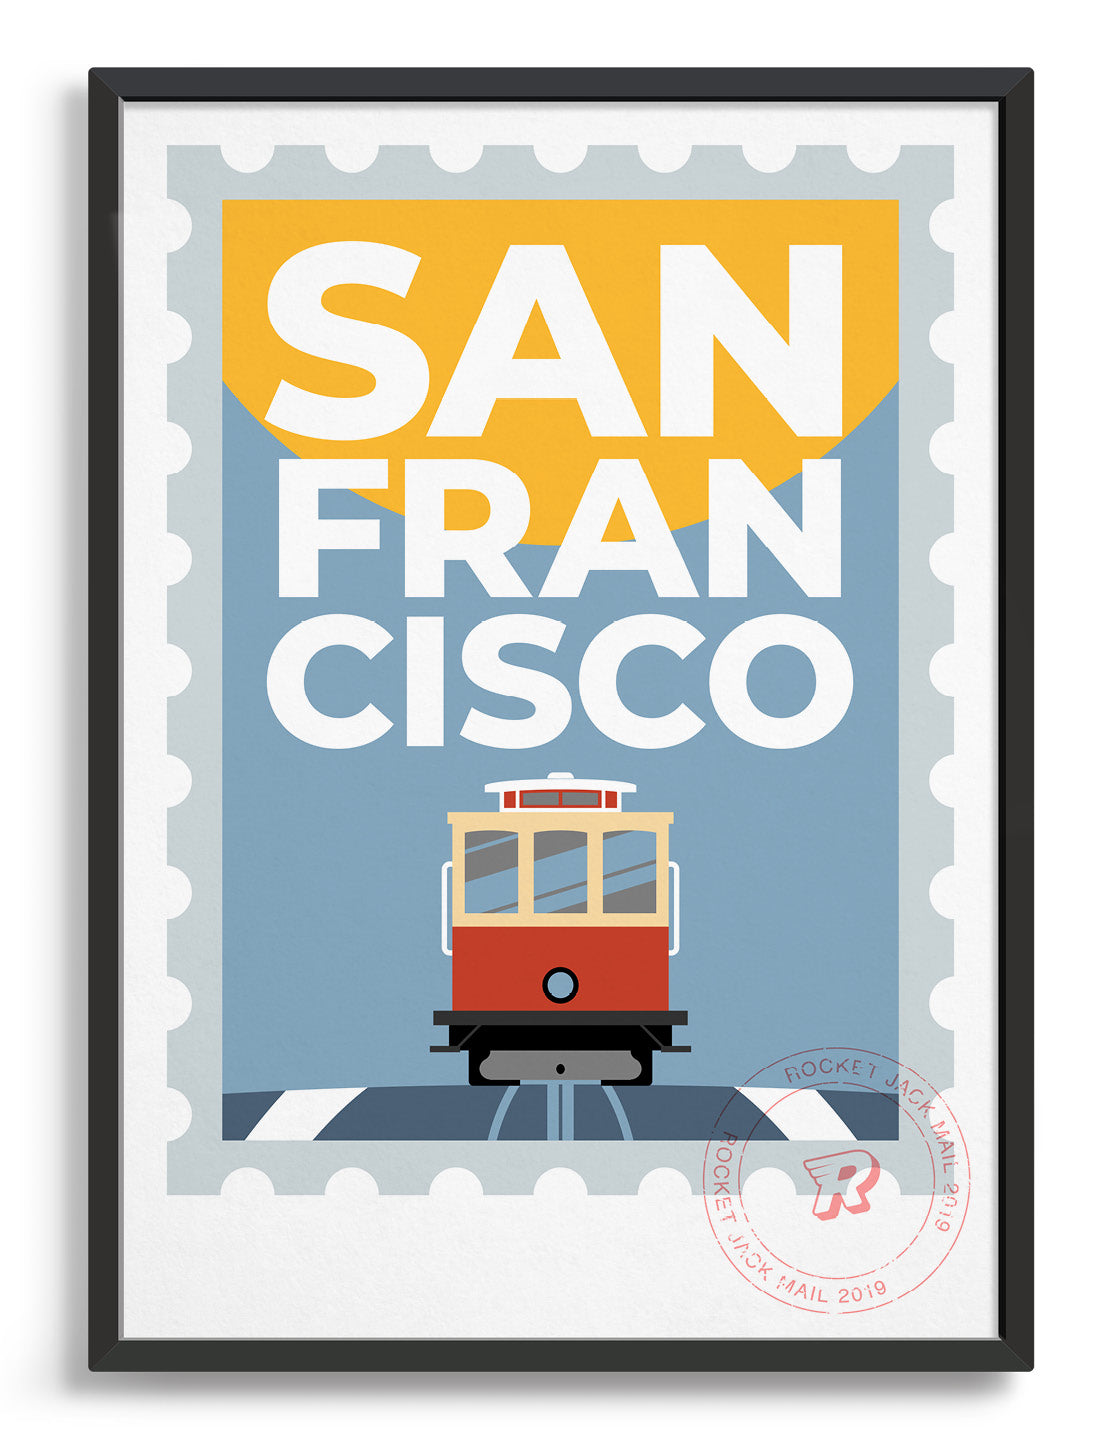 San Francisco stamp style travel poster featuring tram and city text on a grey and yellow background